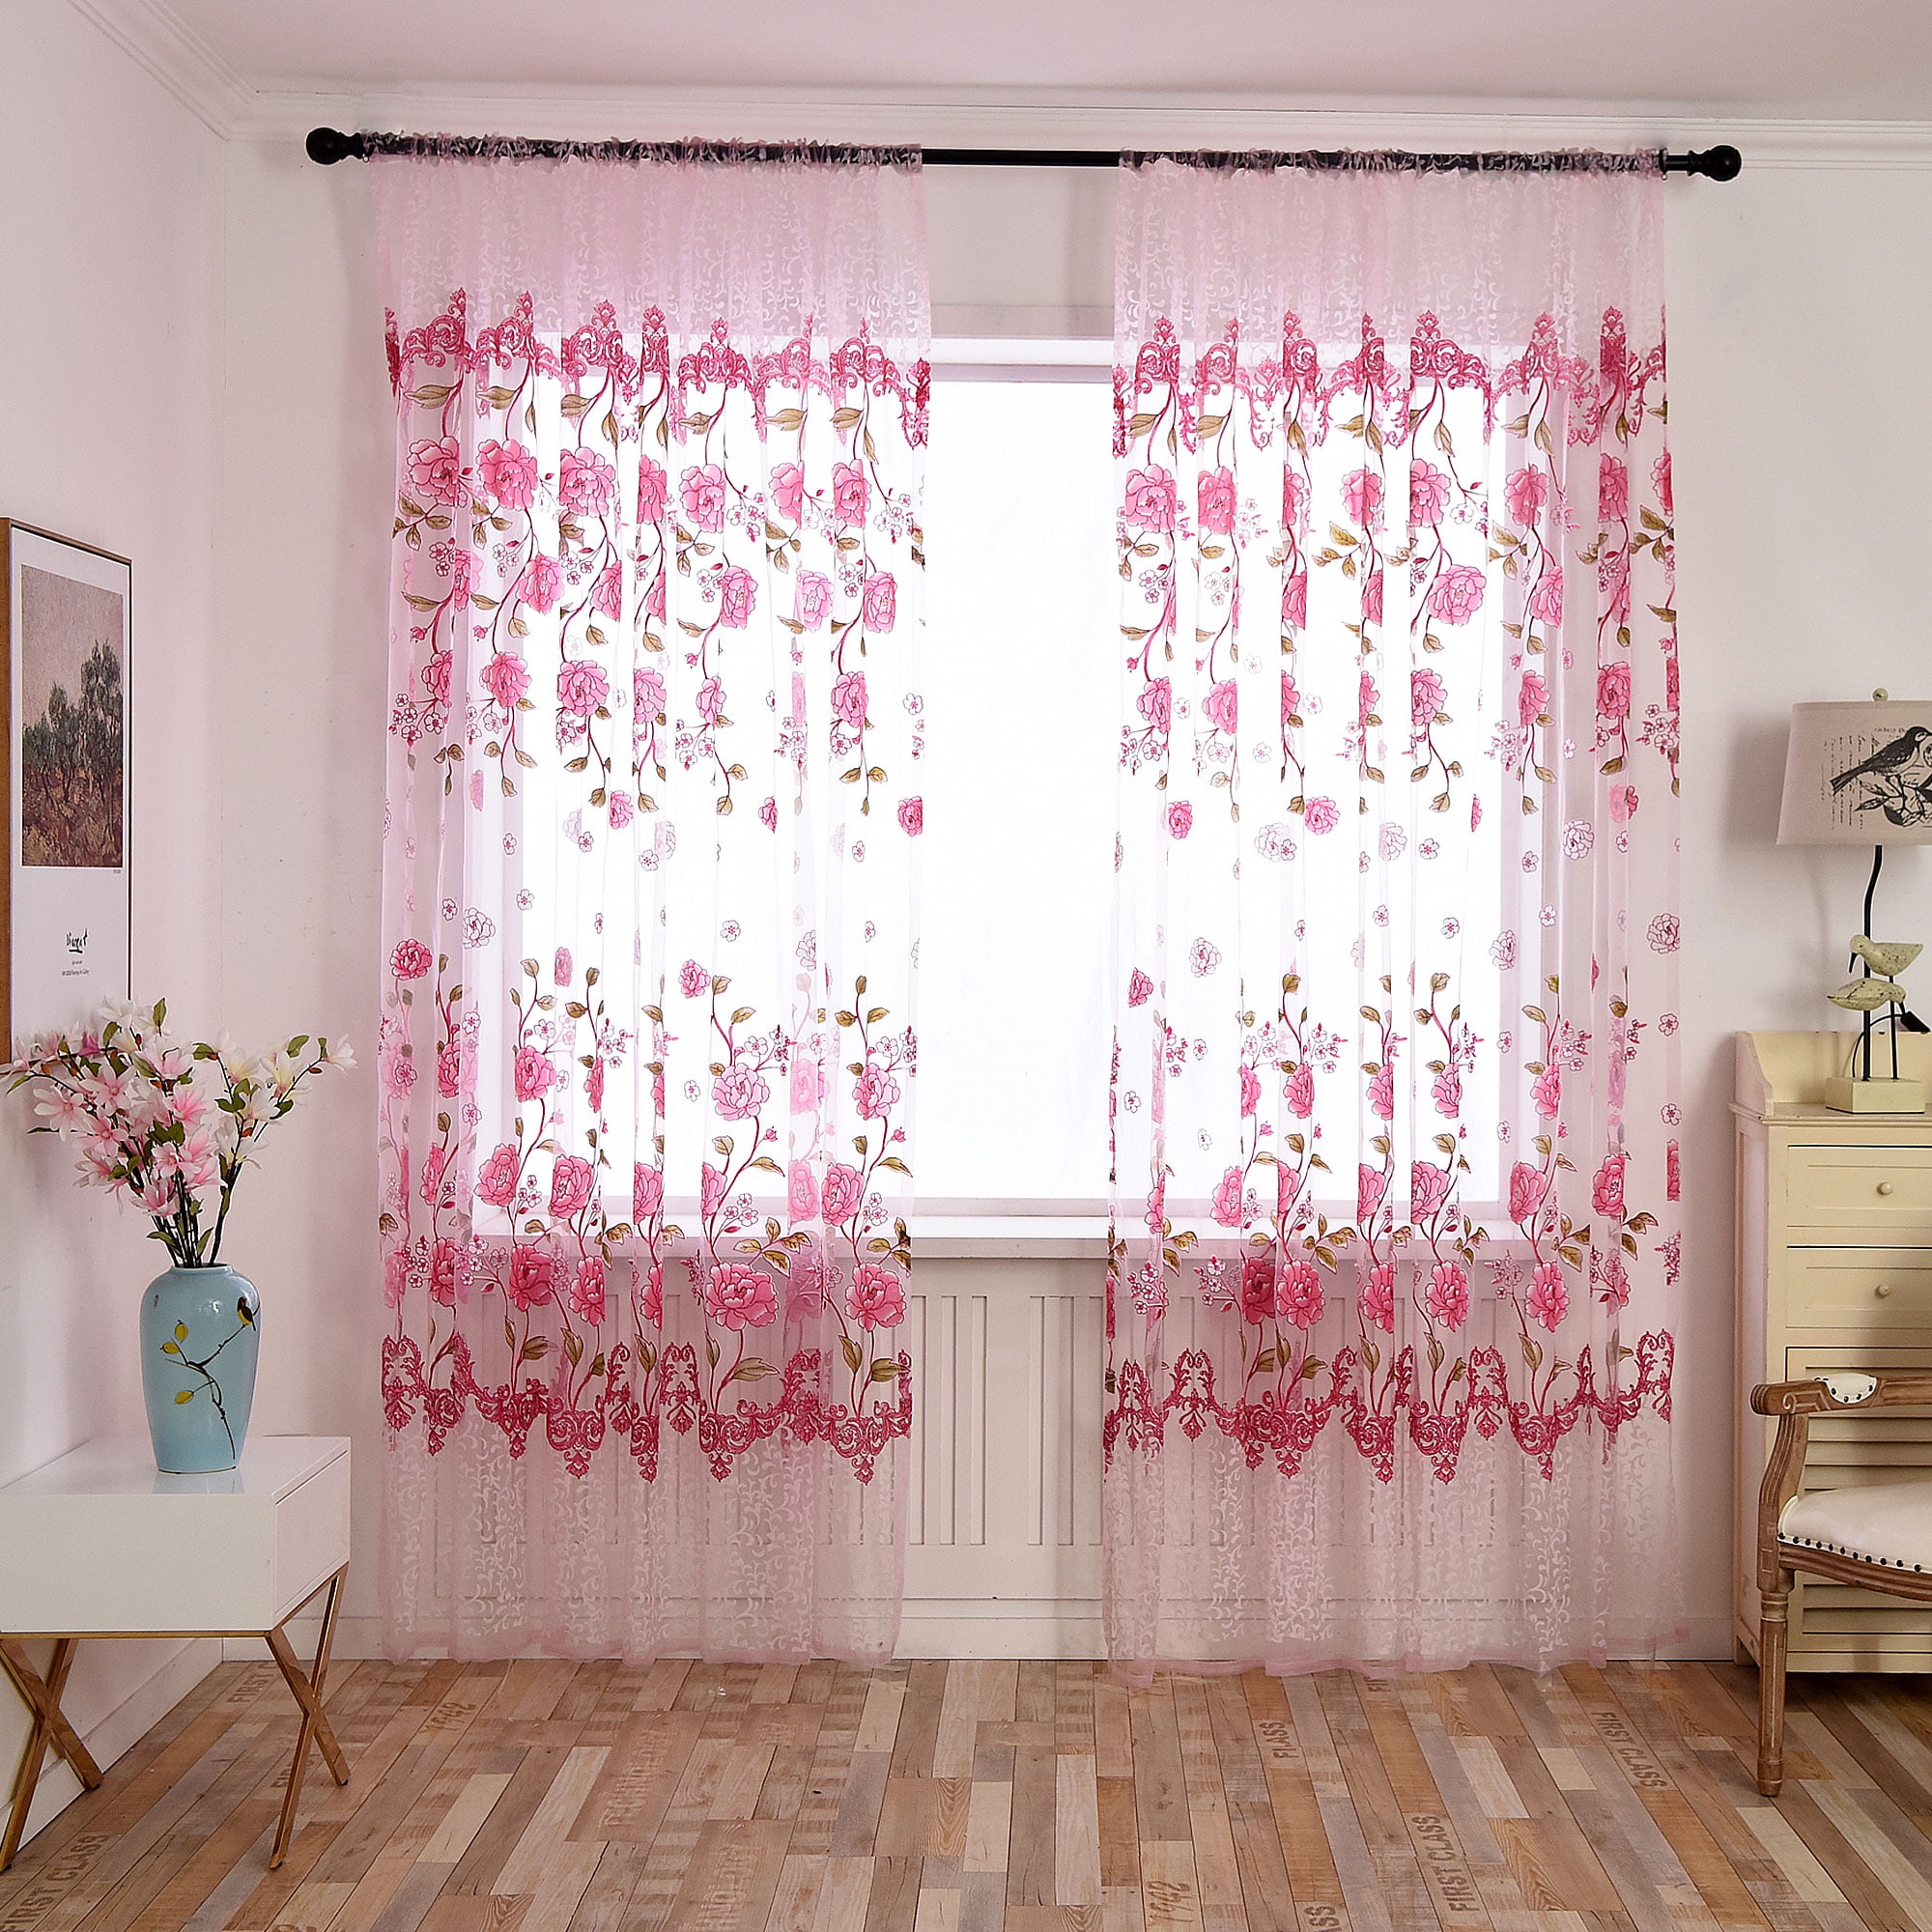 Floral Room Door Sheer Voile Window Valances Panel Drape Curtain Tulle Scarf 